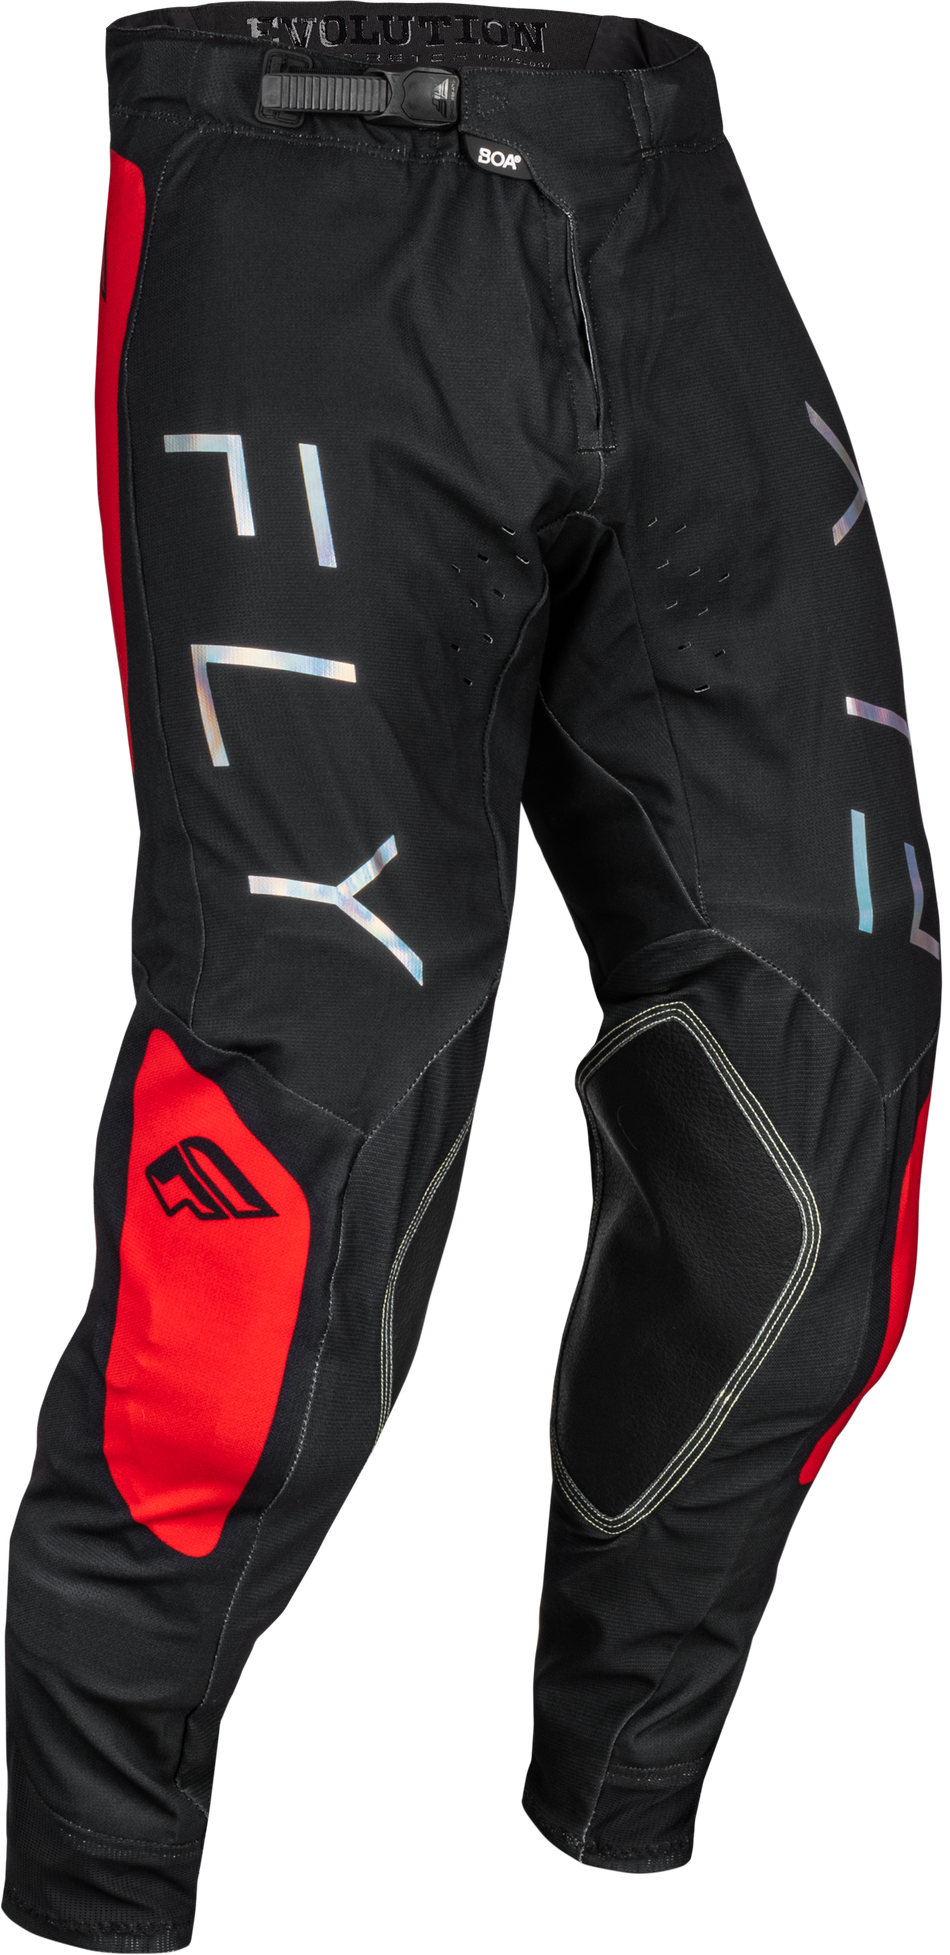 FLY RACING Evolution Dst Pants Black/Red Sz 28 377-13028